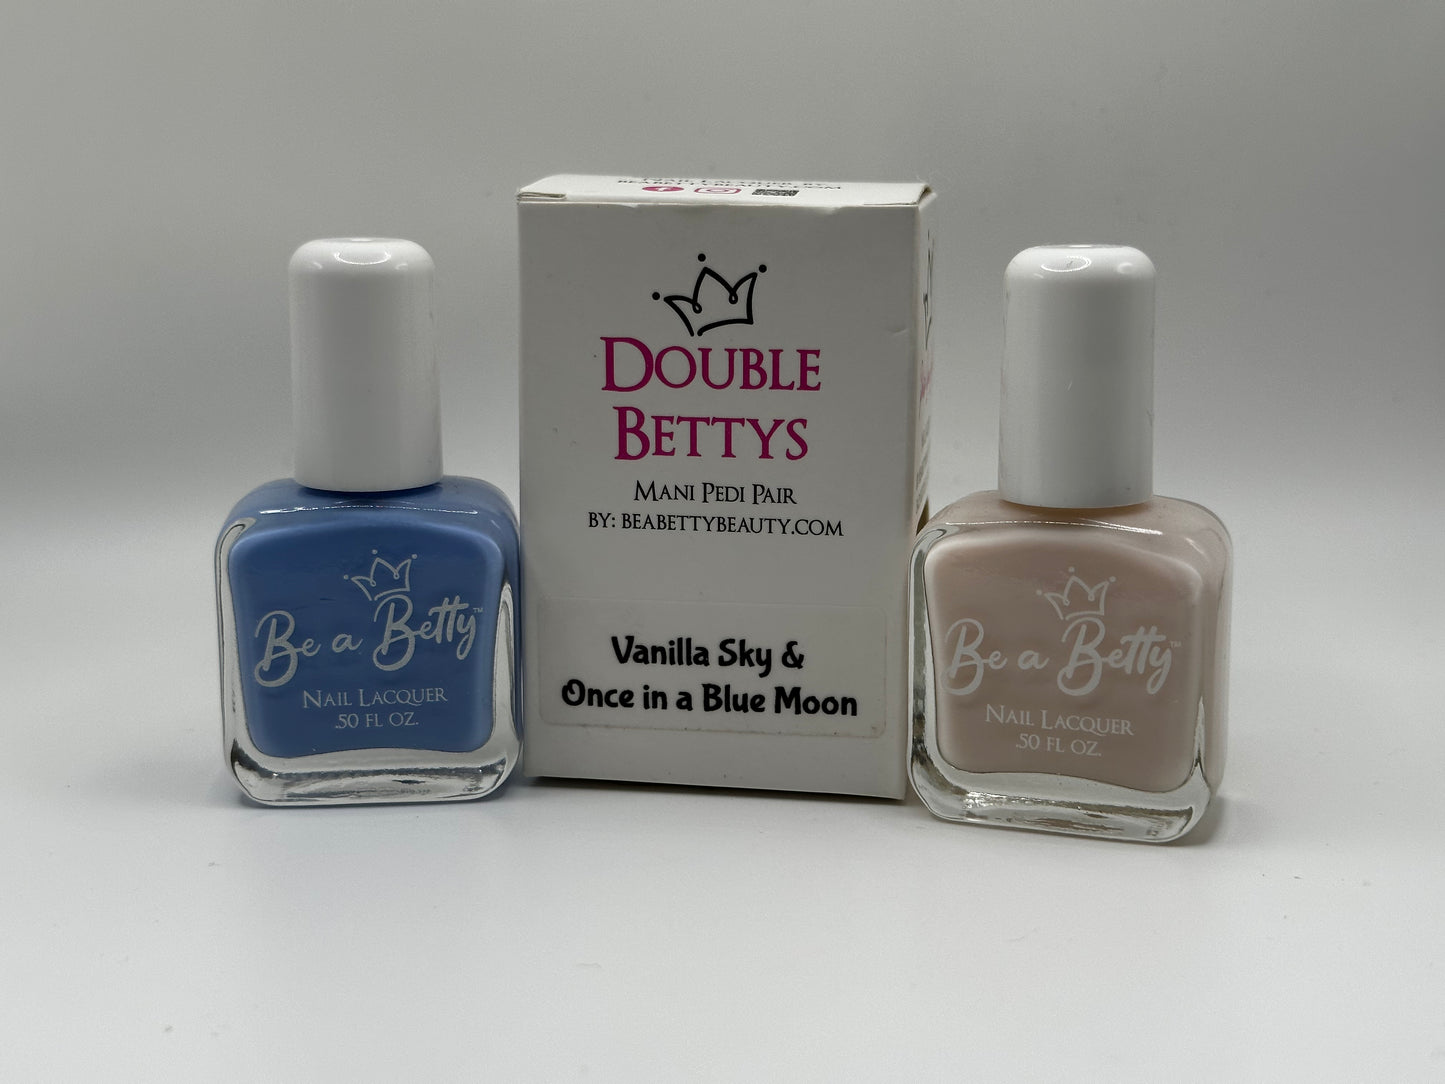 Double Bettys-Vanilla Sky & Once in a Blue Moon